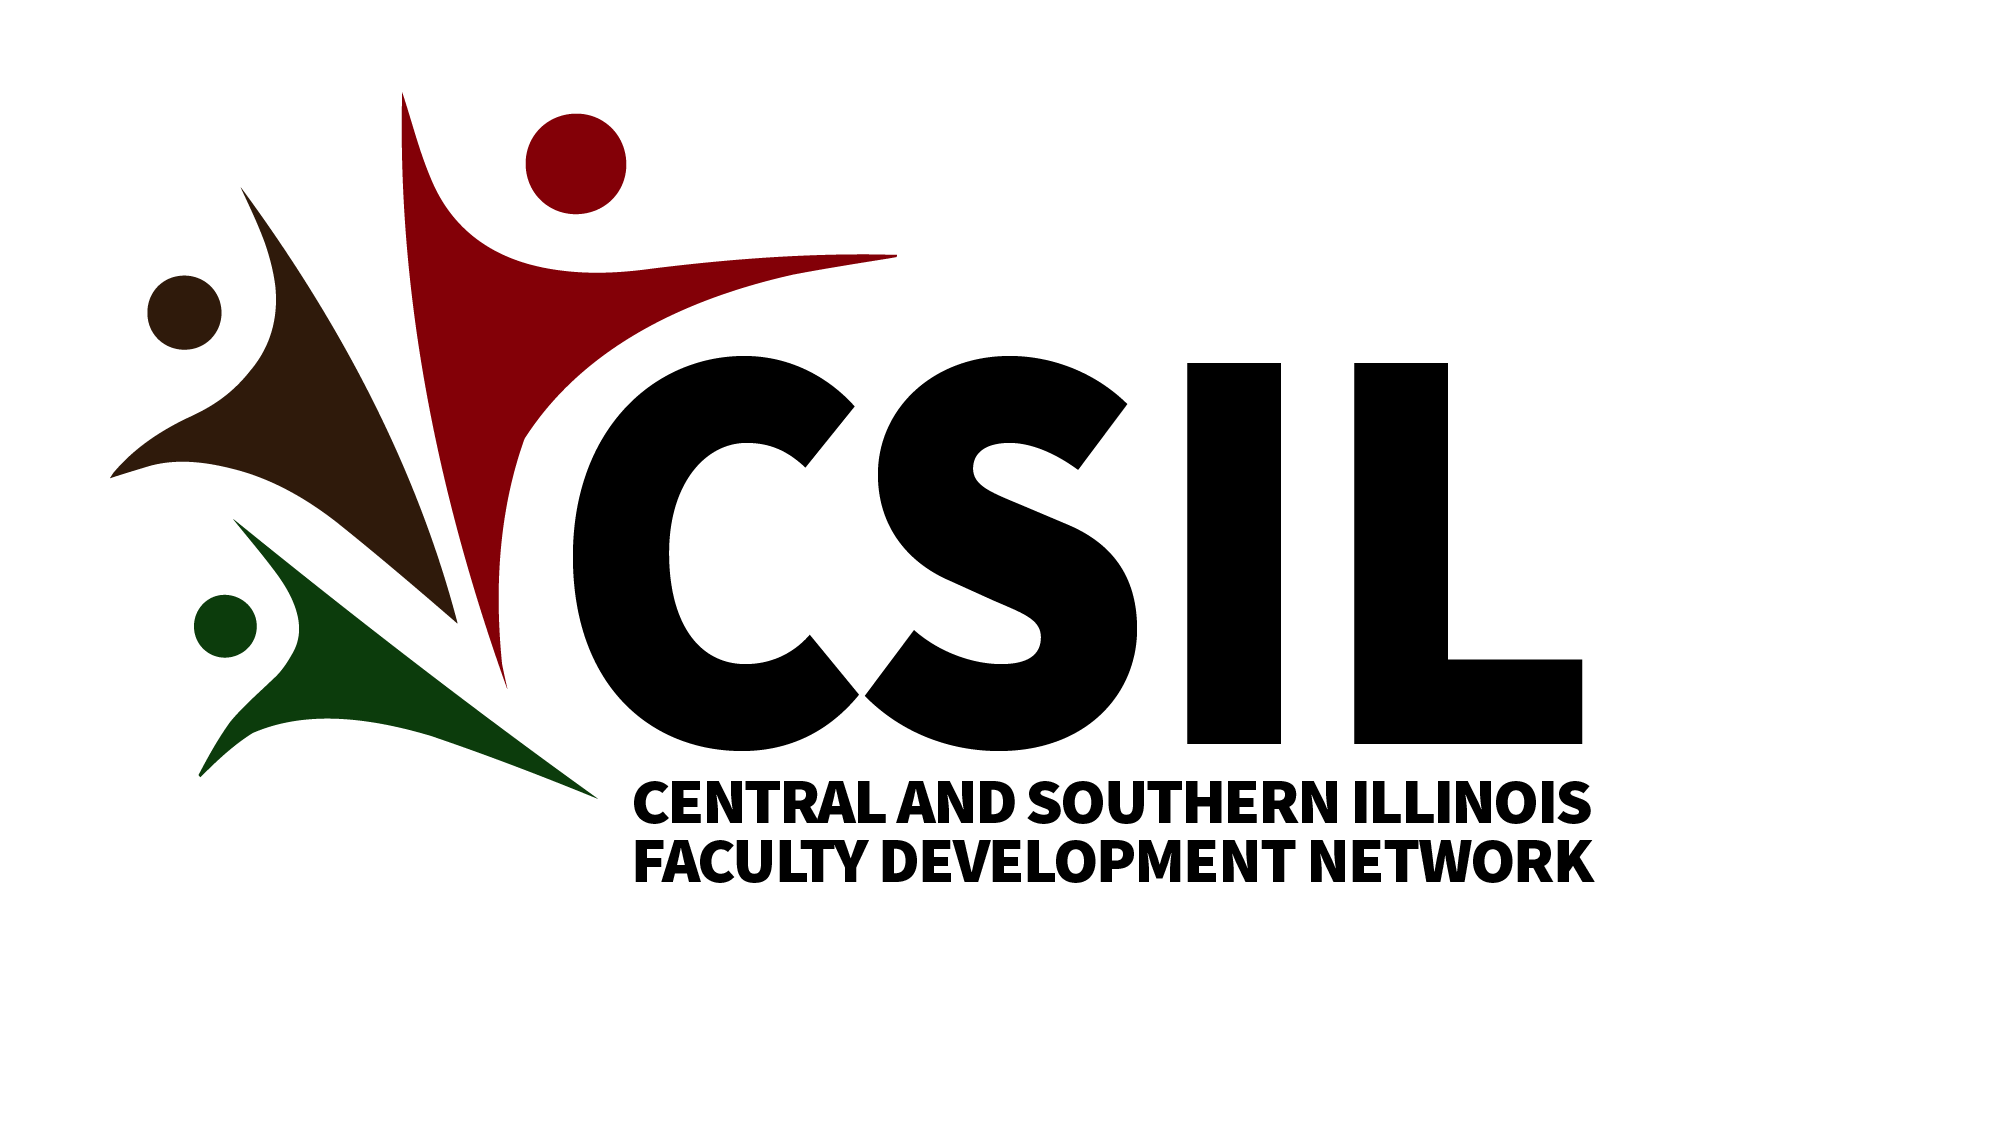 Symbol for the Central and Southern Illinois Faculty Development Network